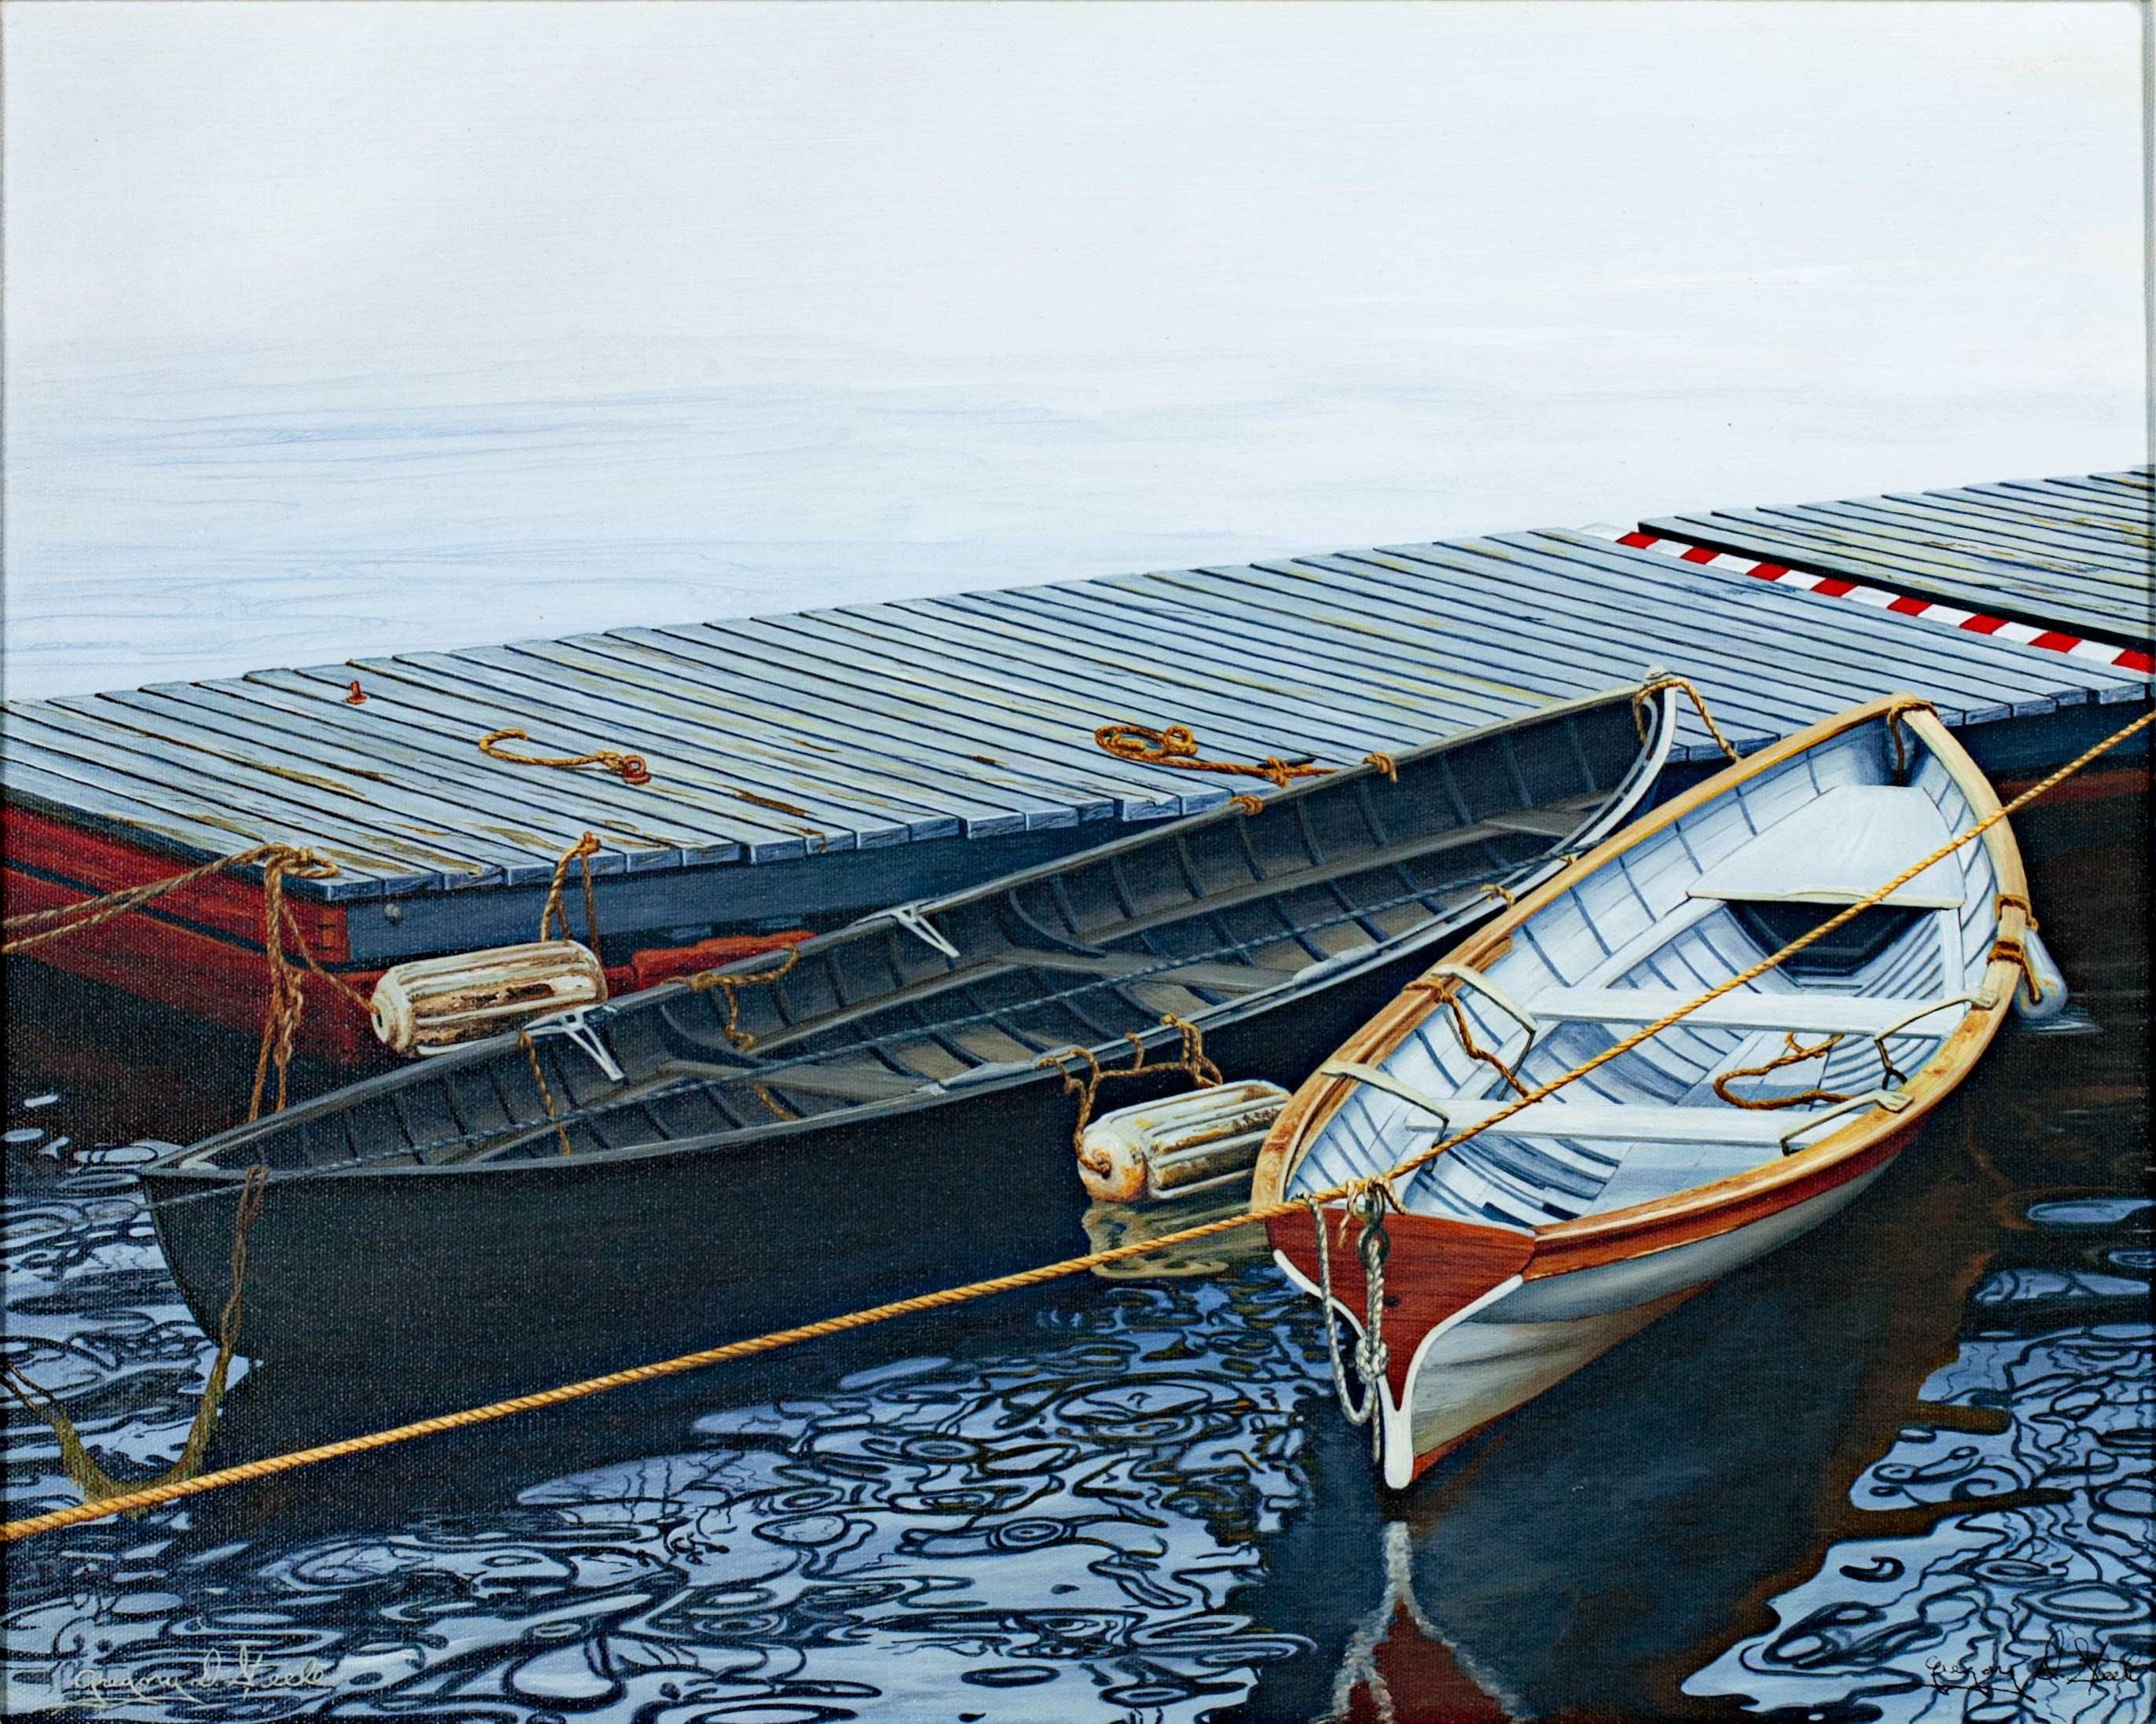 'Boats at Camdon' giclee print on canvas after 1998 oil - Print by Gregory D. Steele